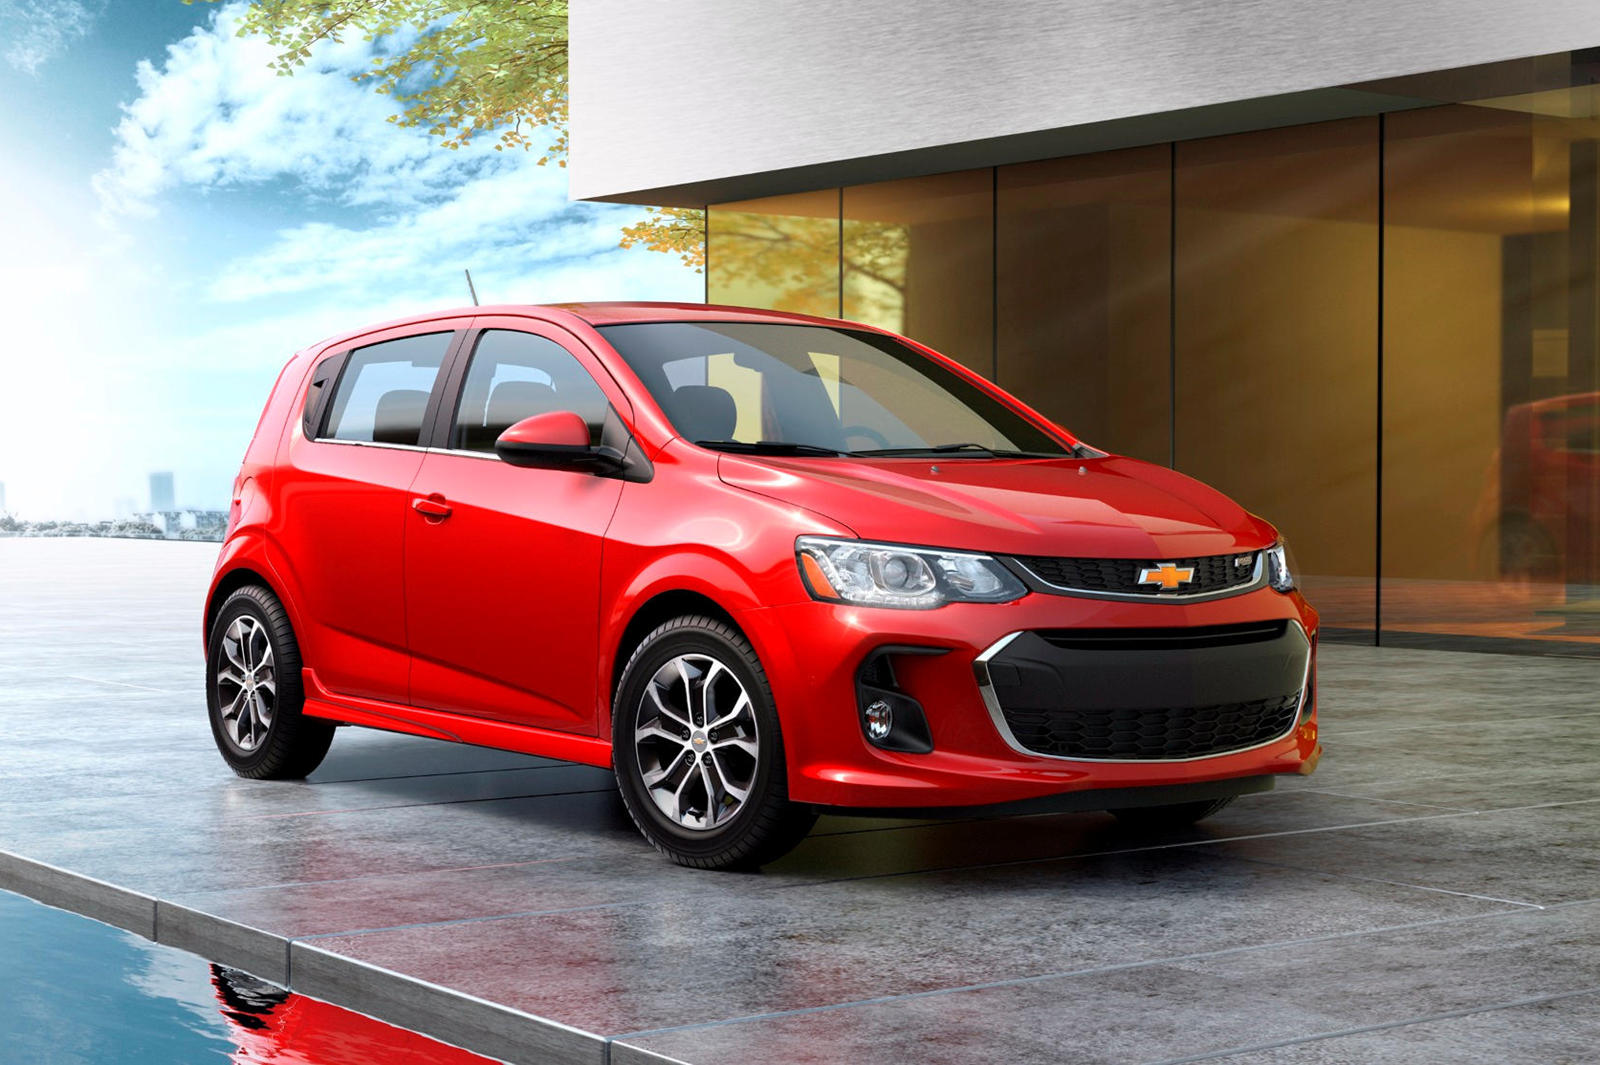 2018 Chevrolet Sonic Hatchback Front Angle View